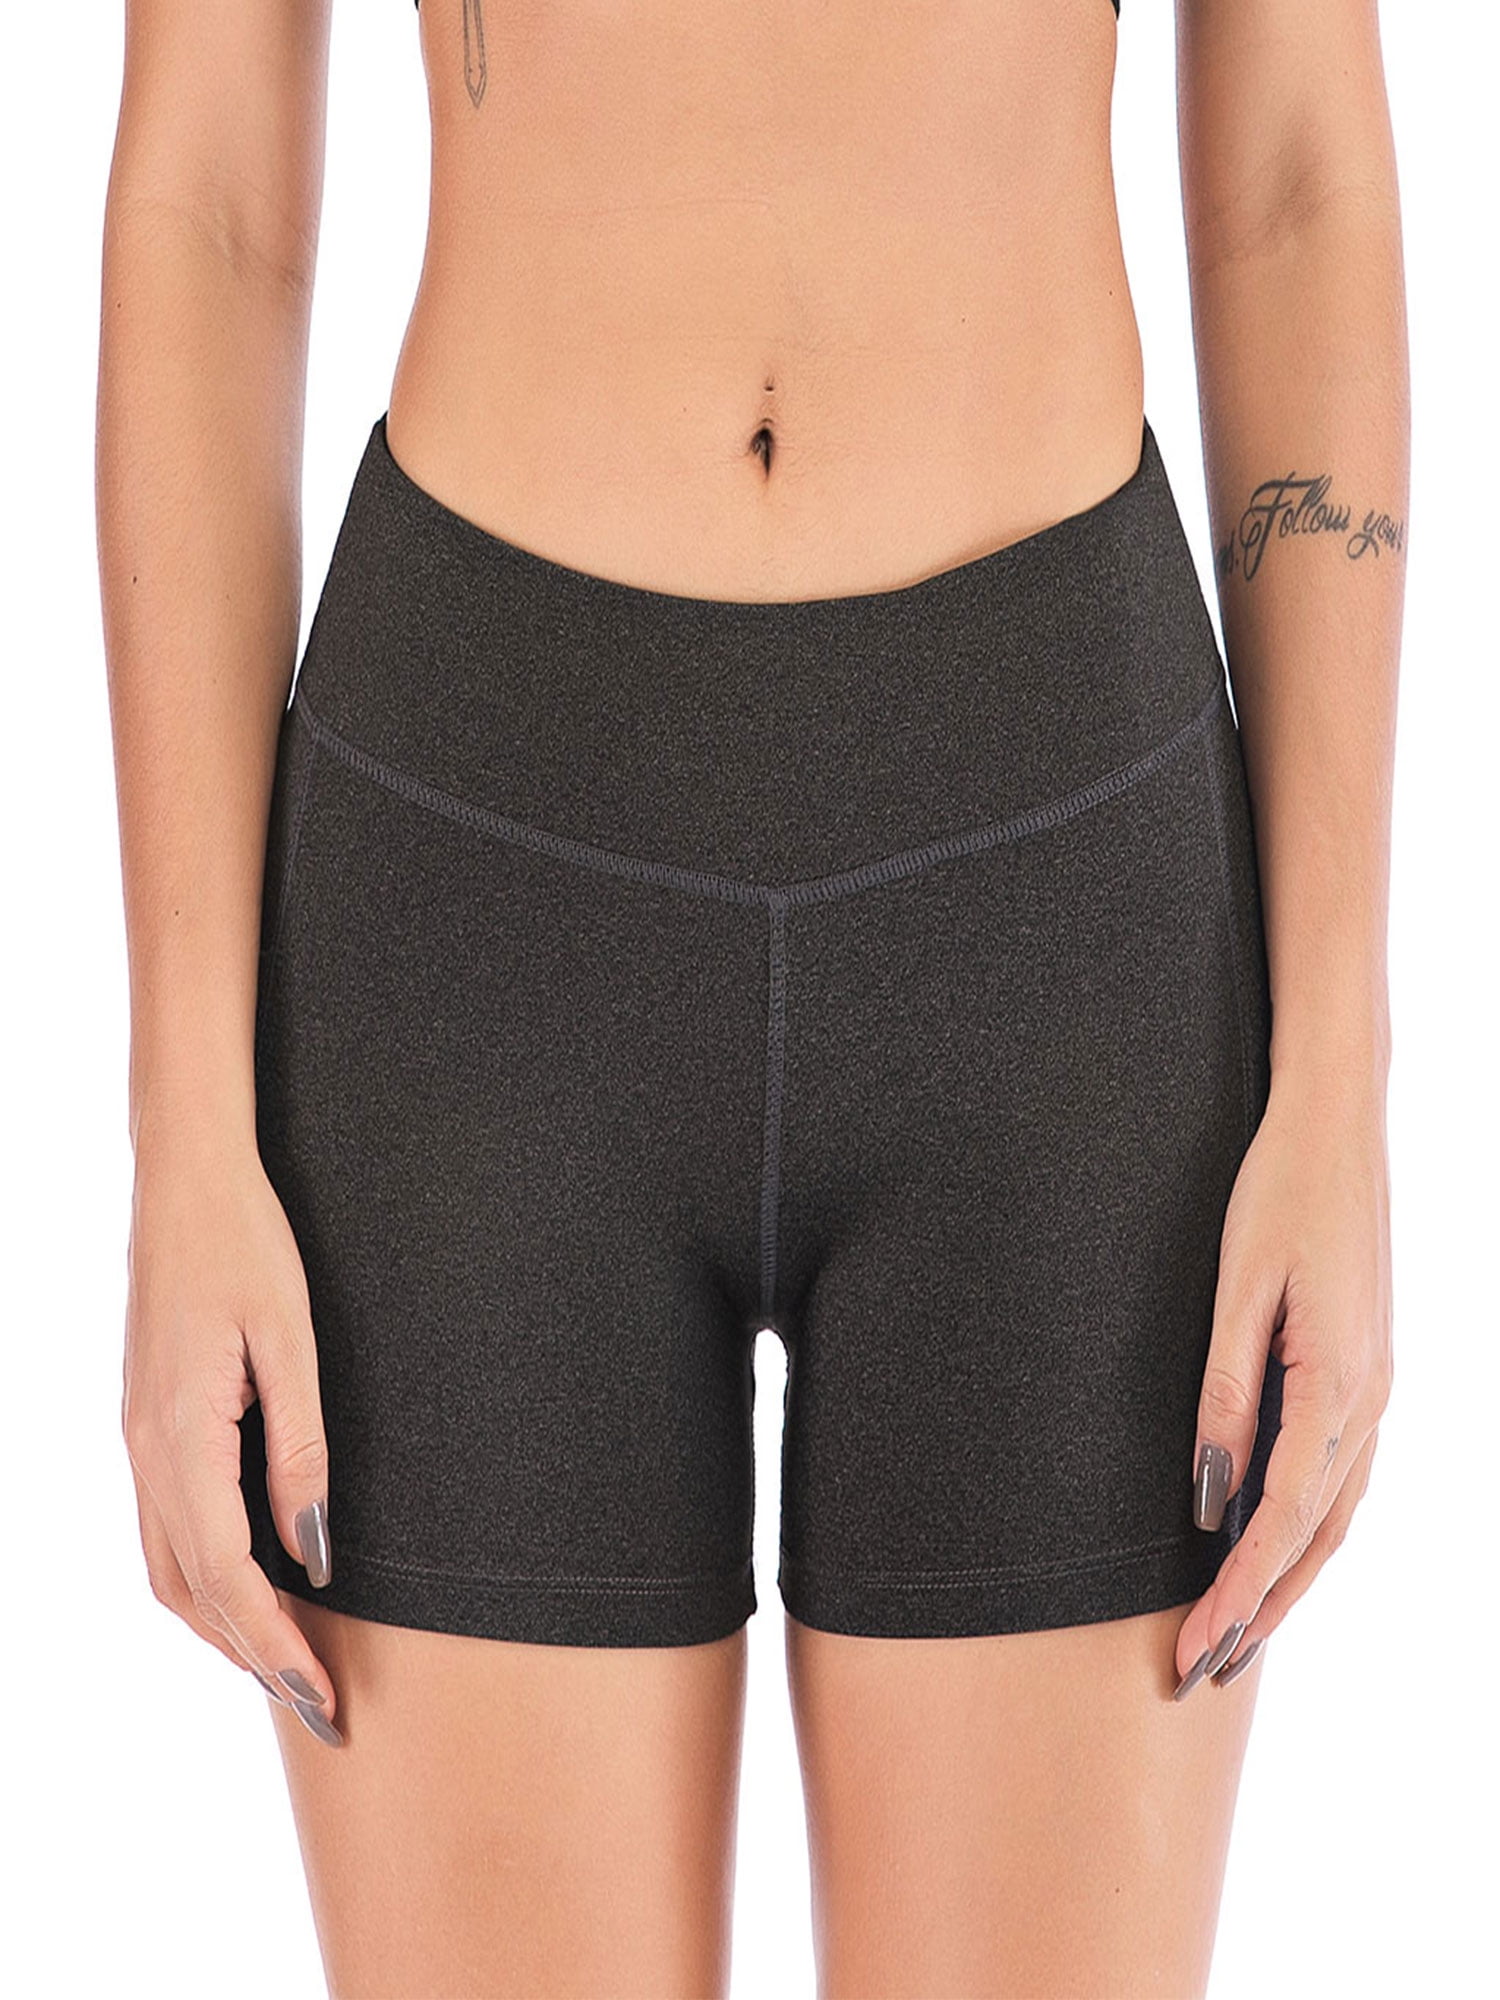 HiMONE - Activewear Bottoms for Women Workout Yoga Pockets Shorts